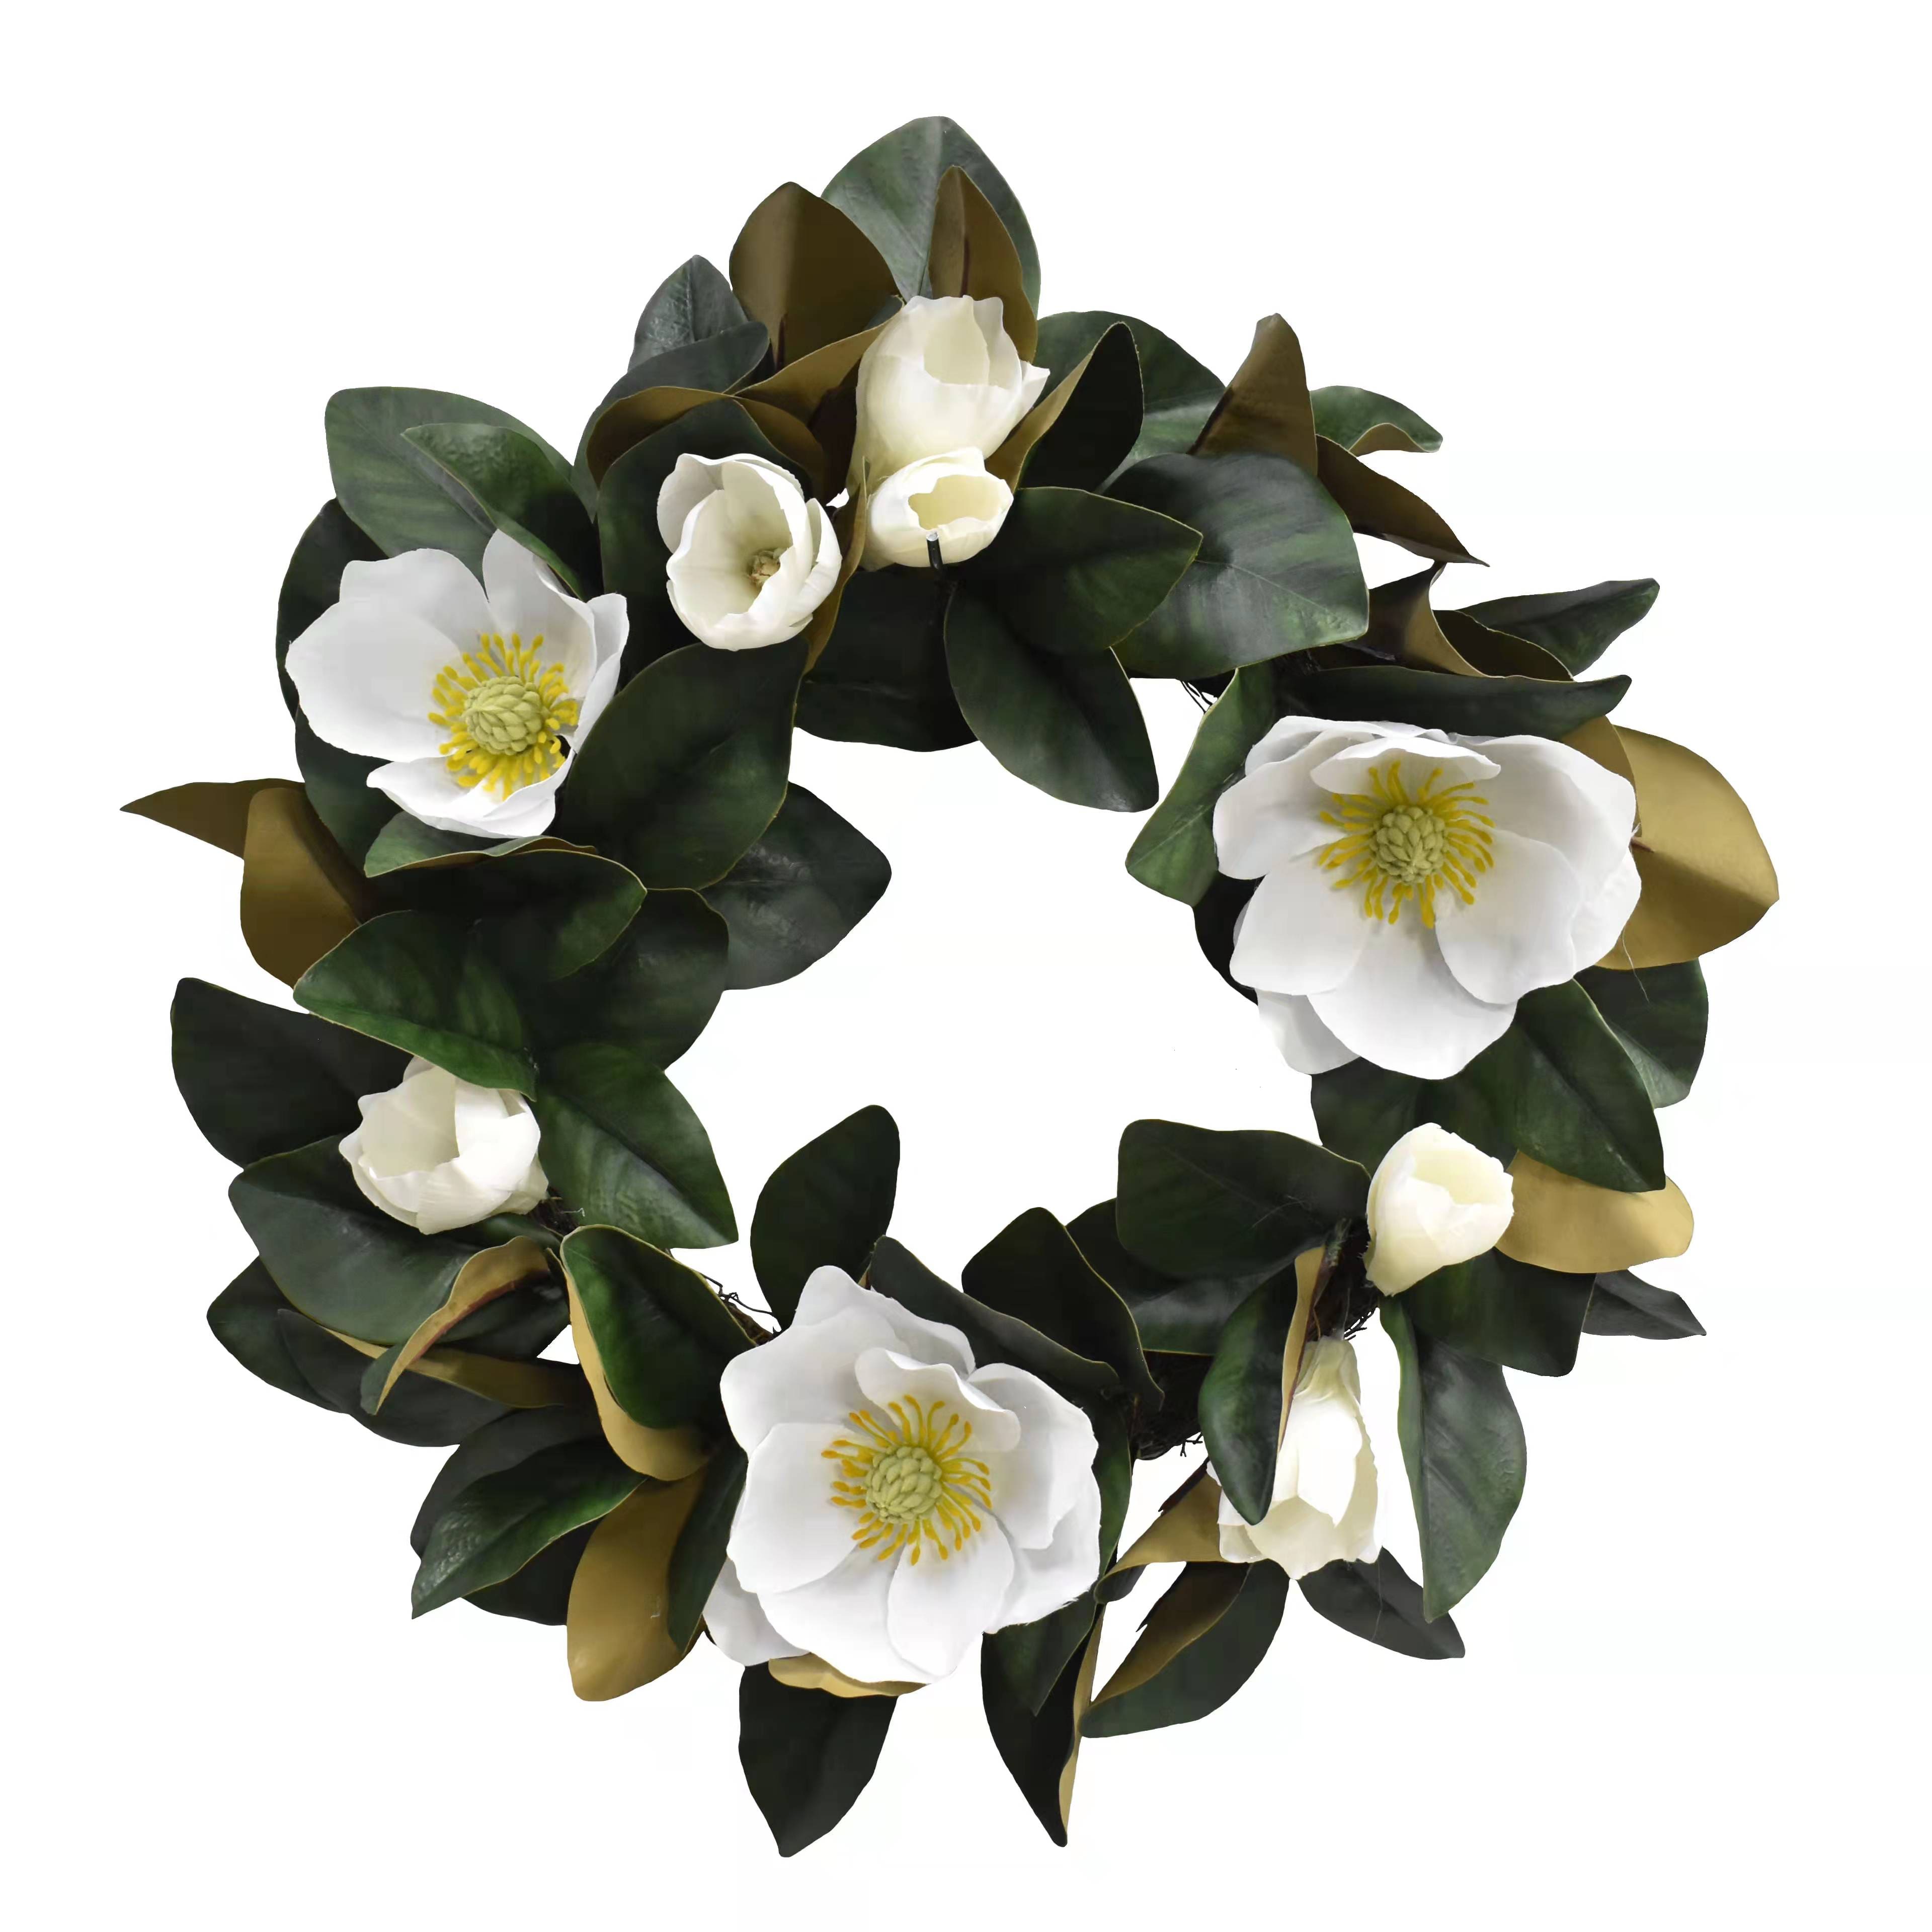 Sublimated Wreath Sign. Welcome to our Home with Magnolias Wreath Sign